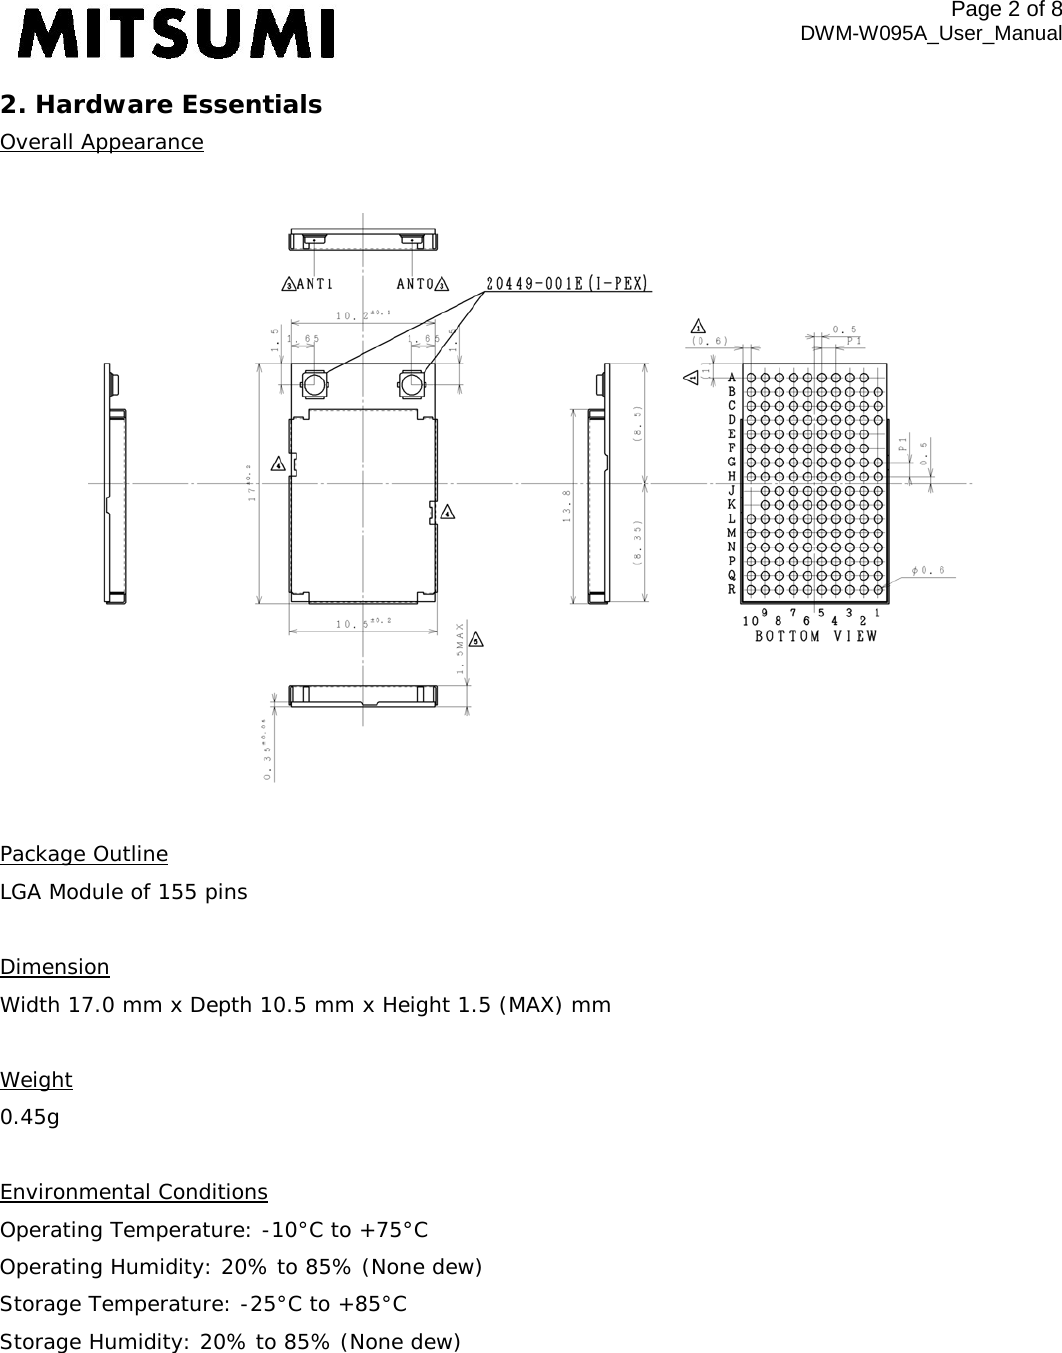 Page 2 of 8 DWM-W095A_User_Manual 2. Hardware Essentials Overall Appearance    Package Outline LGA Module of 155 pins  Dimension Width 17.0 mm x Depth 10.5 mm x Height 1.5 (MAX) mm  Weight 0.45g  Environmental Conditions Operating Temperature: -10°C to +75°C Operating Humidity: 20% to 85% (None dew) Storage Temperature: -25°C to +85°C Storage Humidity: 20% to 85% (None dew) 